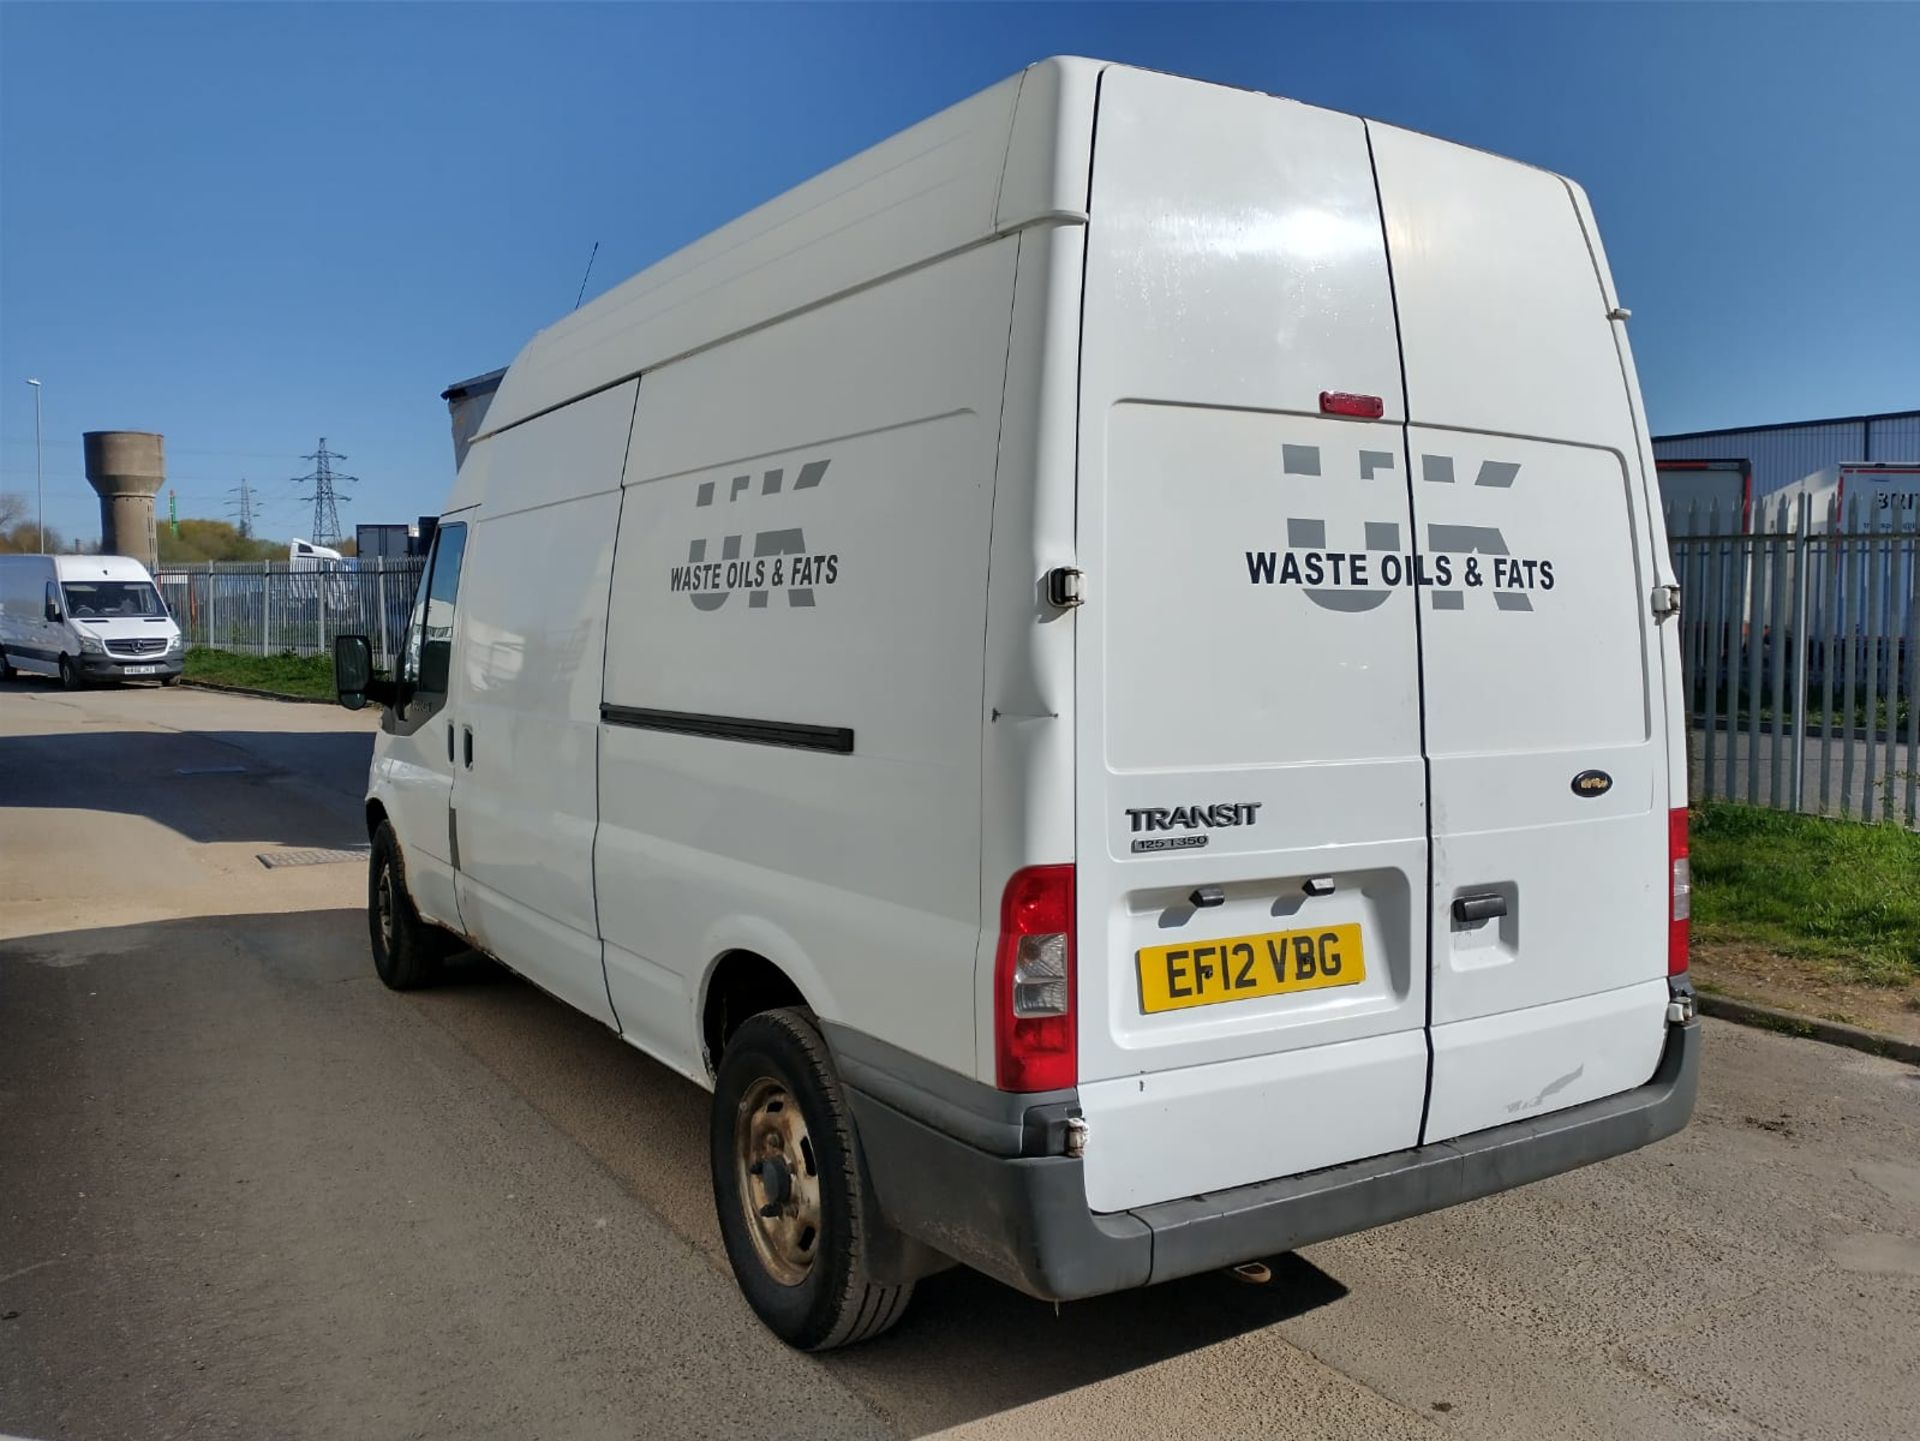 2012 Ford Transit Panel Van 2.2 5dr Medium Roof Panel Van - CL505 - Location: Corby - Image 3 of 13